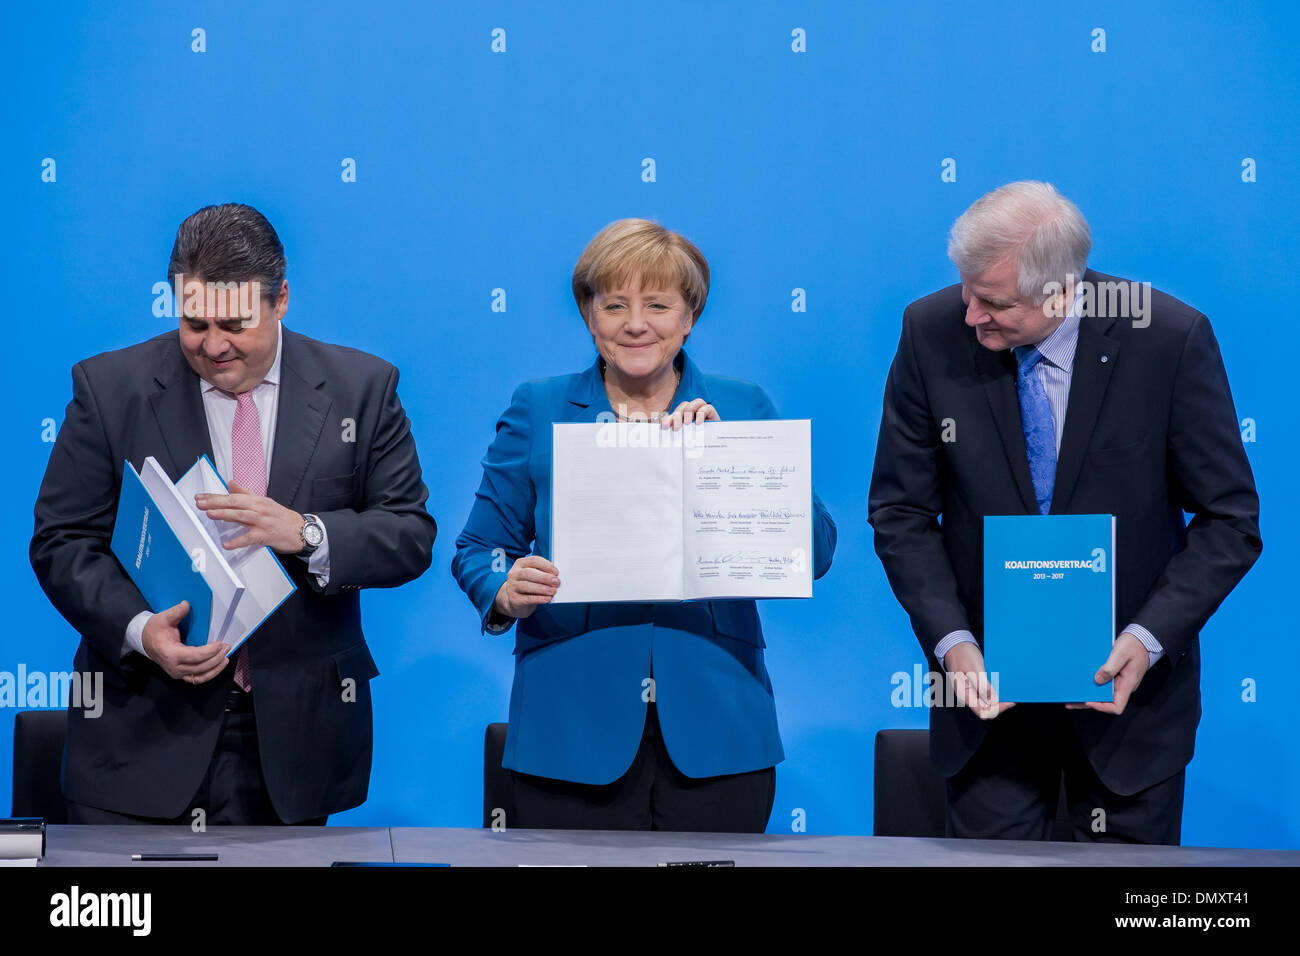 Dec. 16, 2013 - Merkel, CDU Chairman, Seehofer, CSU chairman and Gabriel, SPD Chairman sign the coalition agreement at Paul LÃƒÂ¶be Haus in Berlin. / Picture: Sigmar Gabriel (SPD), SPD Chairman, Angela Merkel, German Chancellor, and Horst Seehofer (CSU), CSU chairman and Minister-President of Bavaria, in Berlin, on December 17, 2013.Photo: Reynaldo Paganelli/NurPhoto (Credit Image: © Reynaldo Paganelli/NurPhoto/ZUMAPRESS.com) Stock Photo